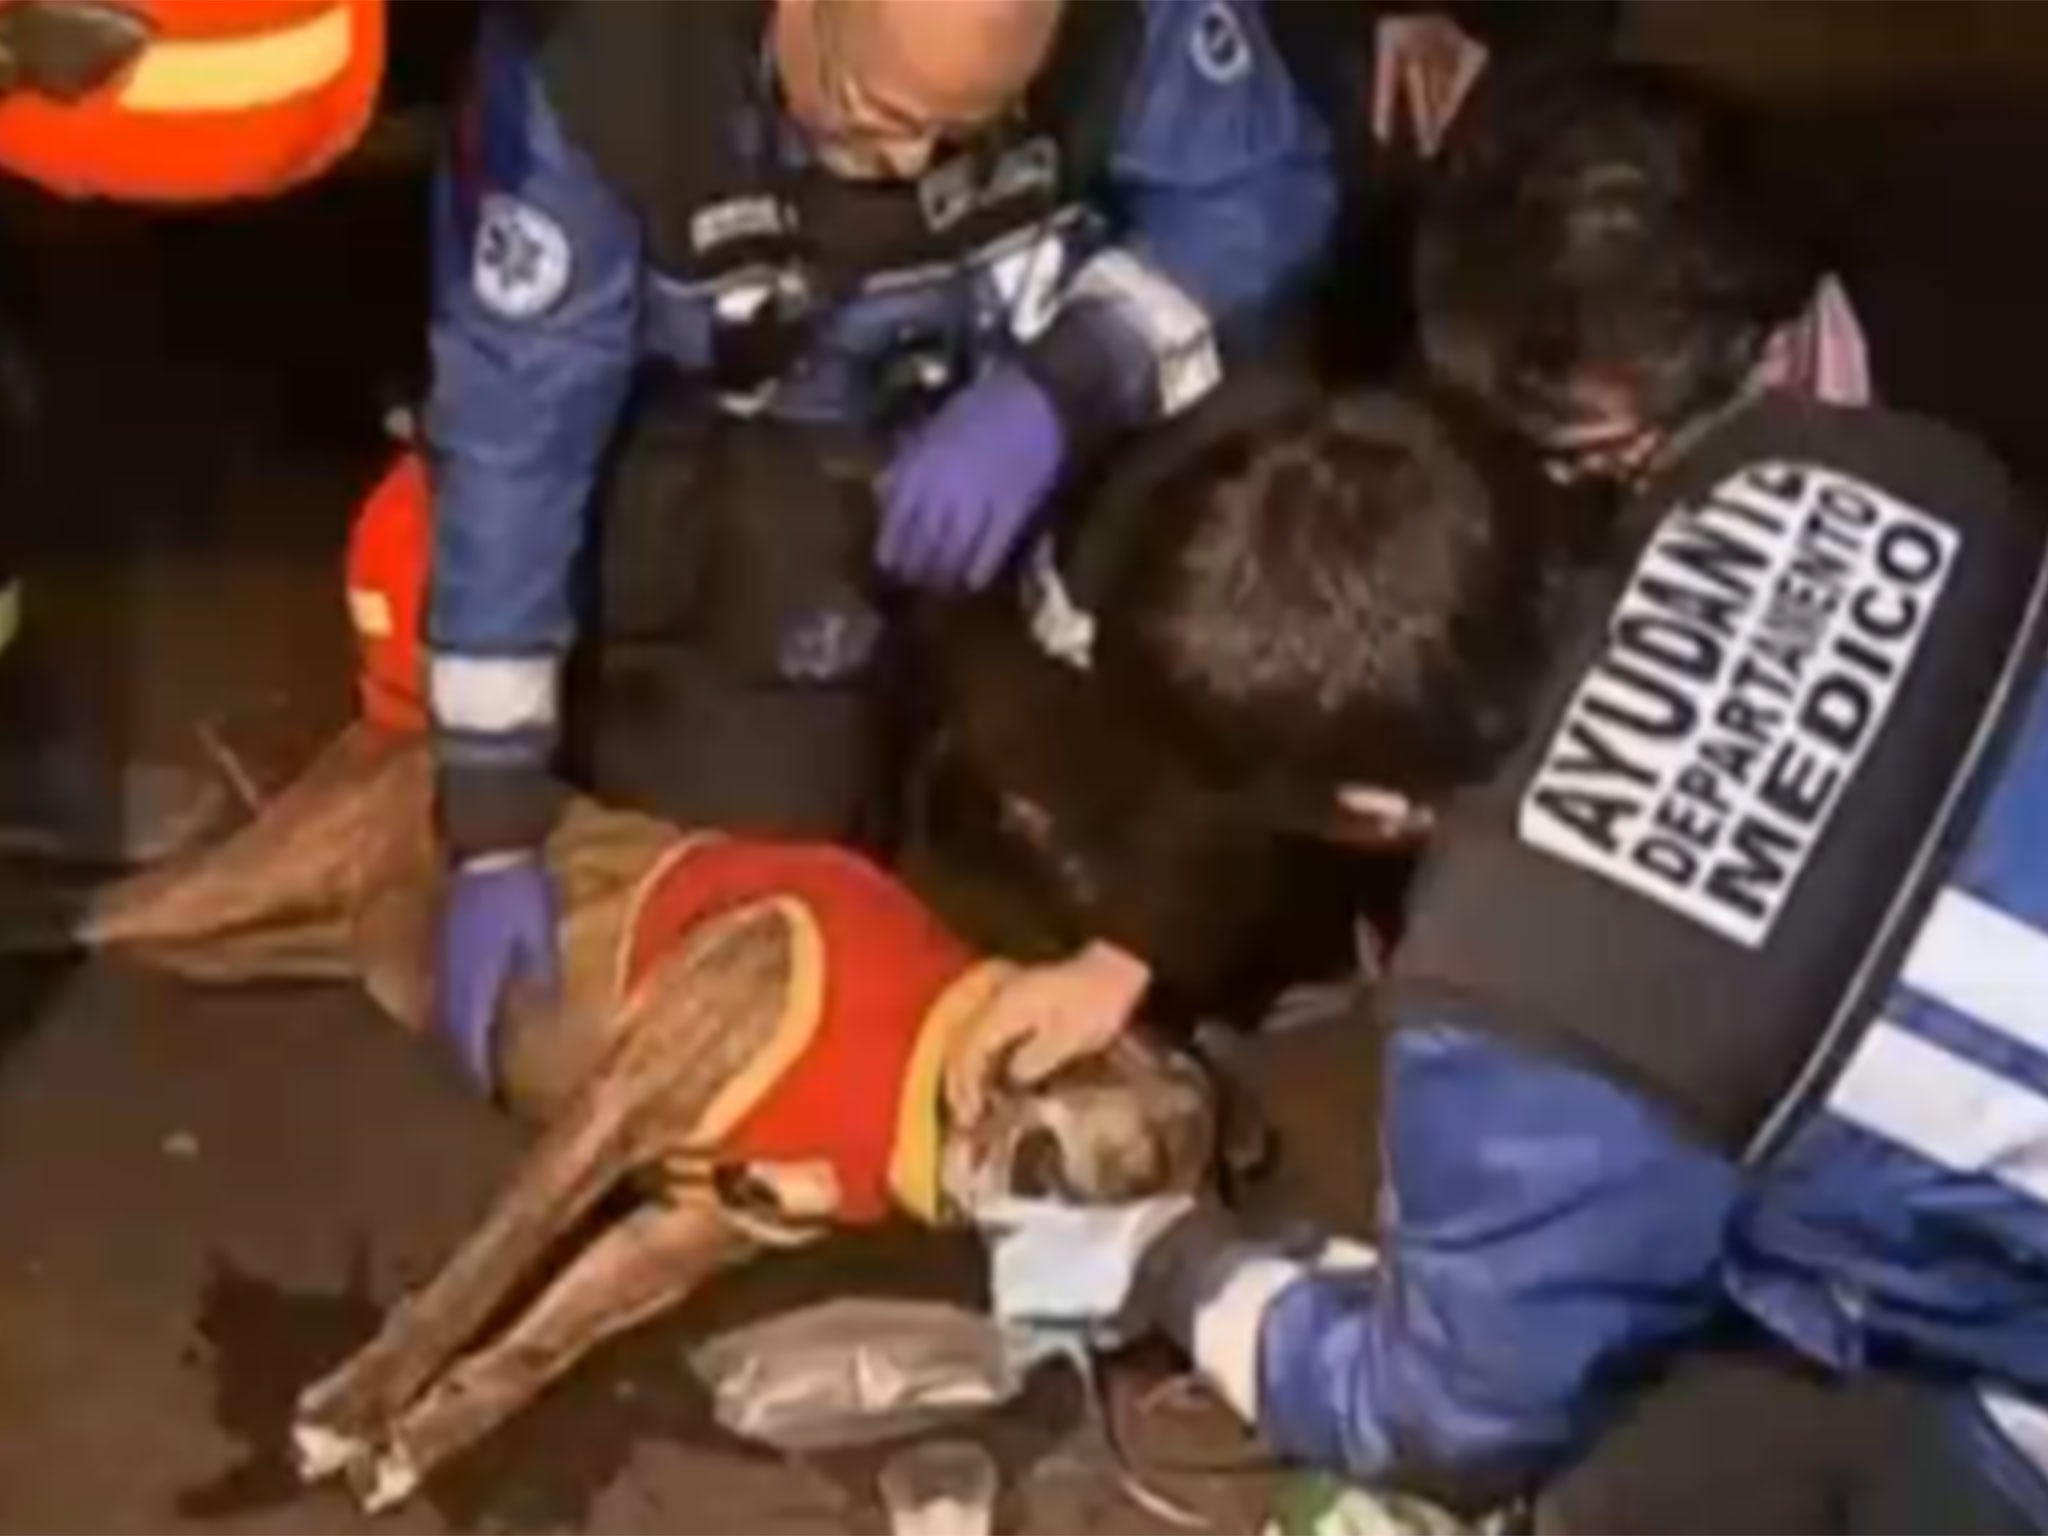 The dog is treated with an oxygen mask by medics